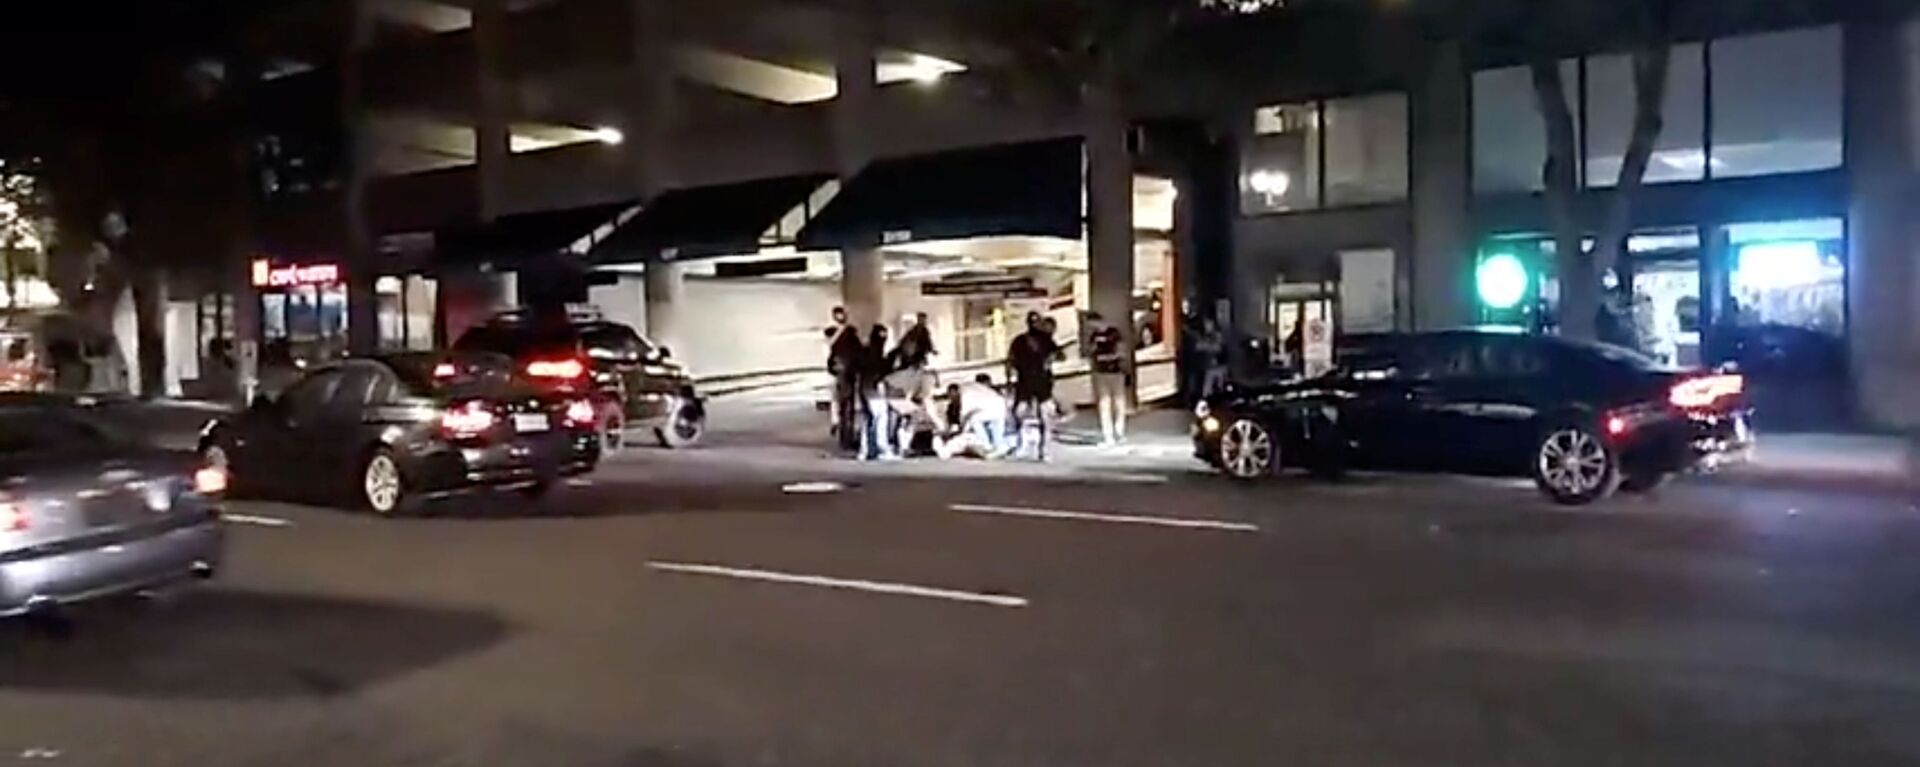 People surround a victim of a shooting in Portland, Oregon, U.S., August 29, 2020 in this screen grab obtained from a social media video. Justin Dunlap ? Democracy Field Trip/via REUTERS THIS IMAGE HAS BEEN SUPPLIED BY A THIRD PARTY. MANDATORY CREDIT. NO RESALES. NO ARCHIVES. - Sputnik International, 1920, 30.08.2020